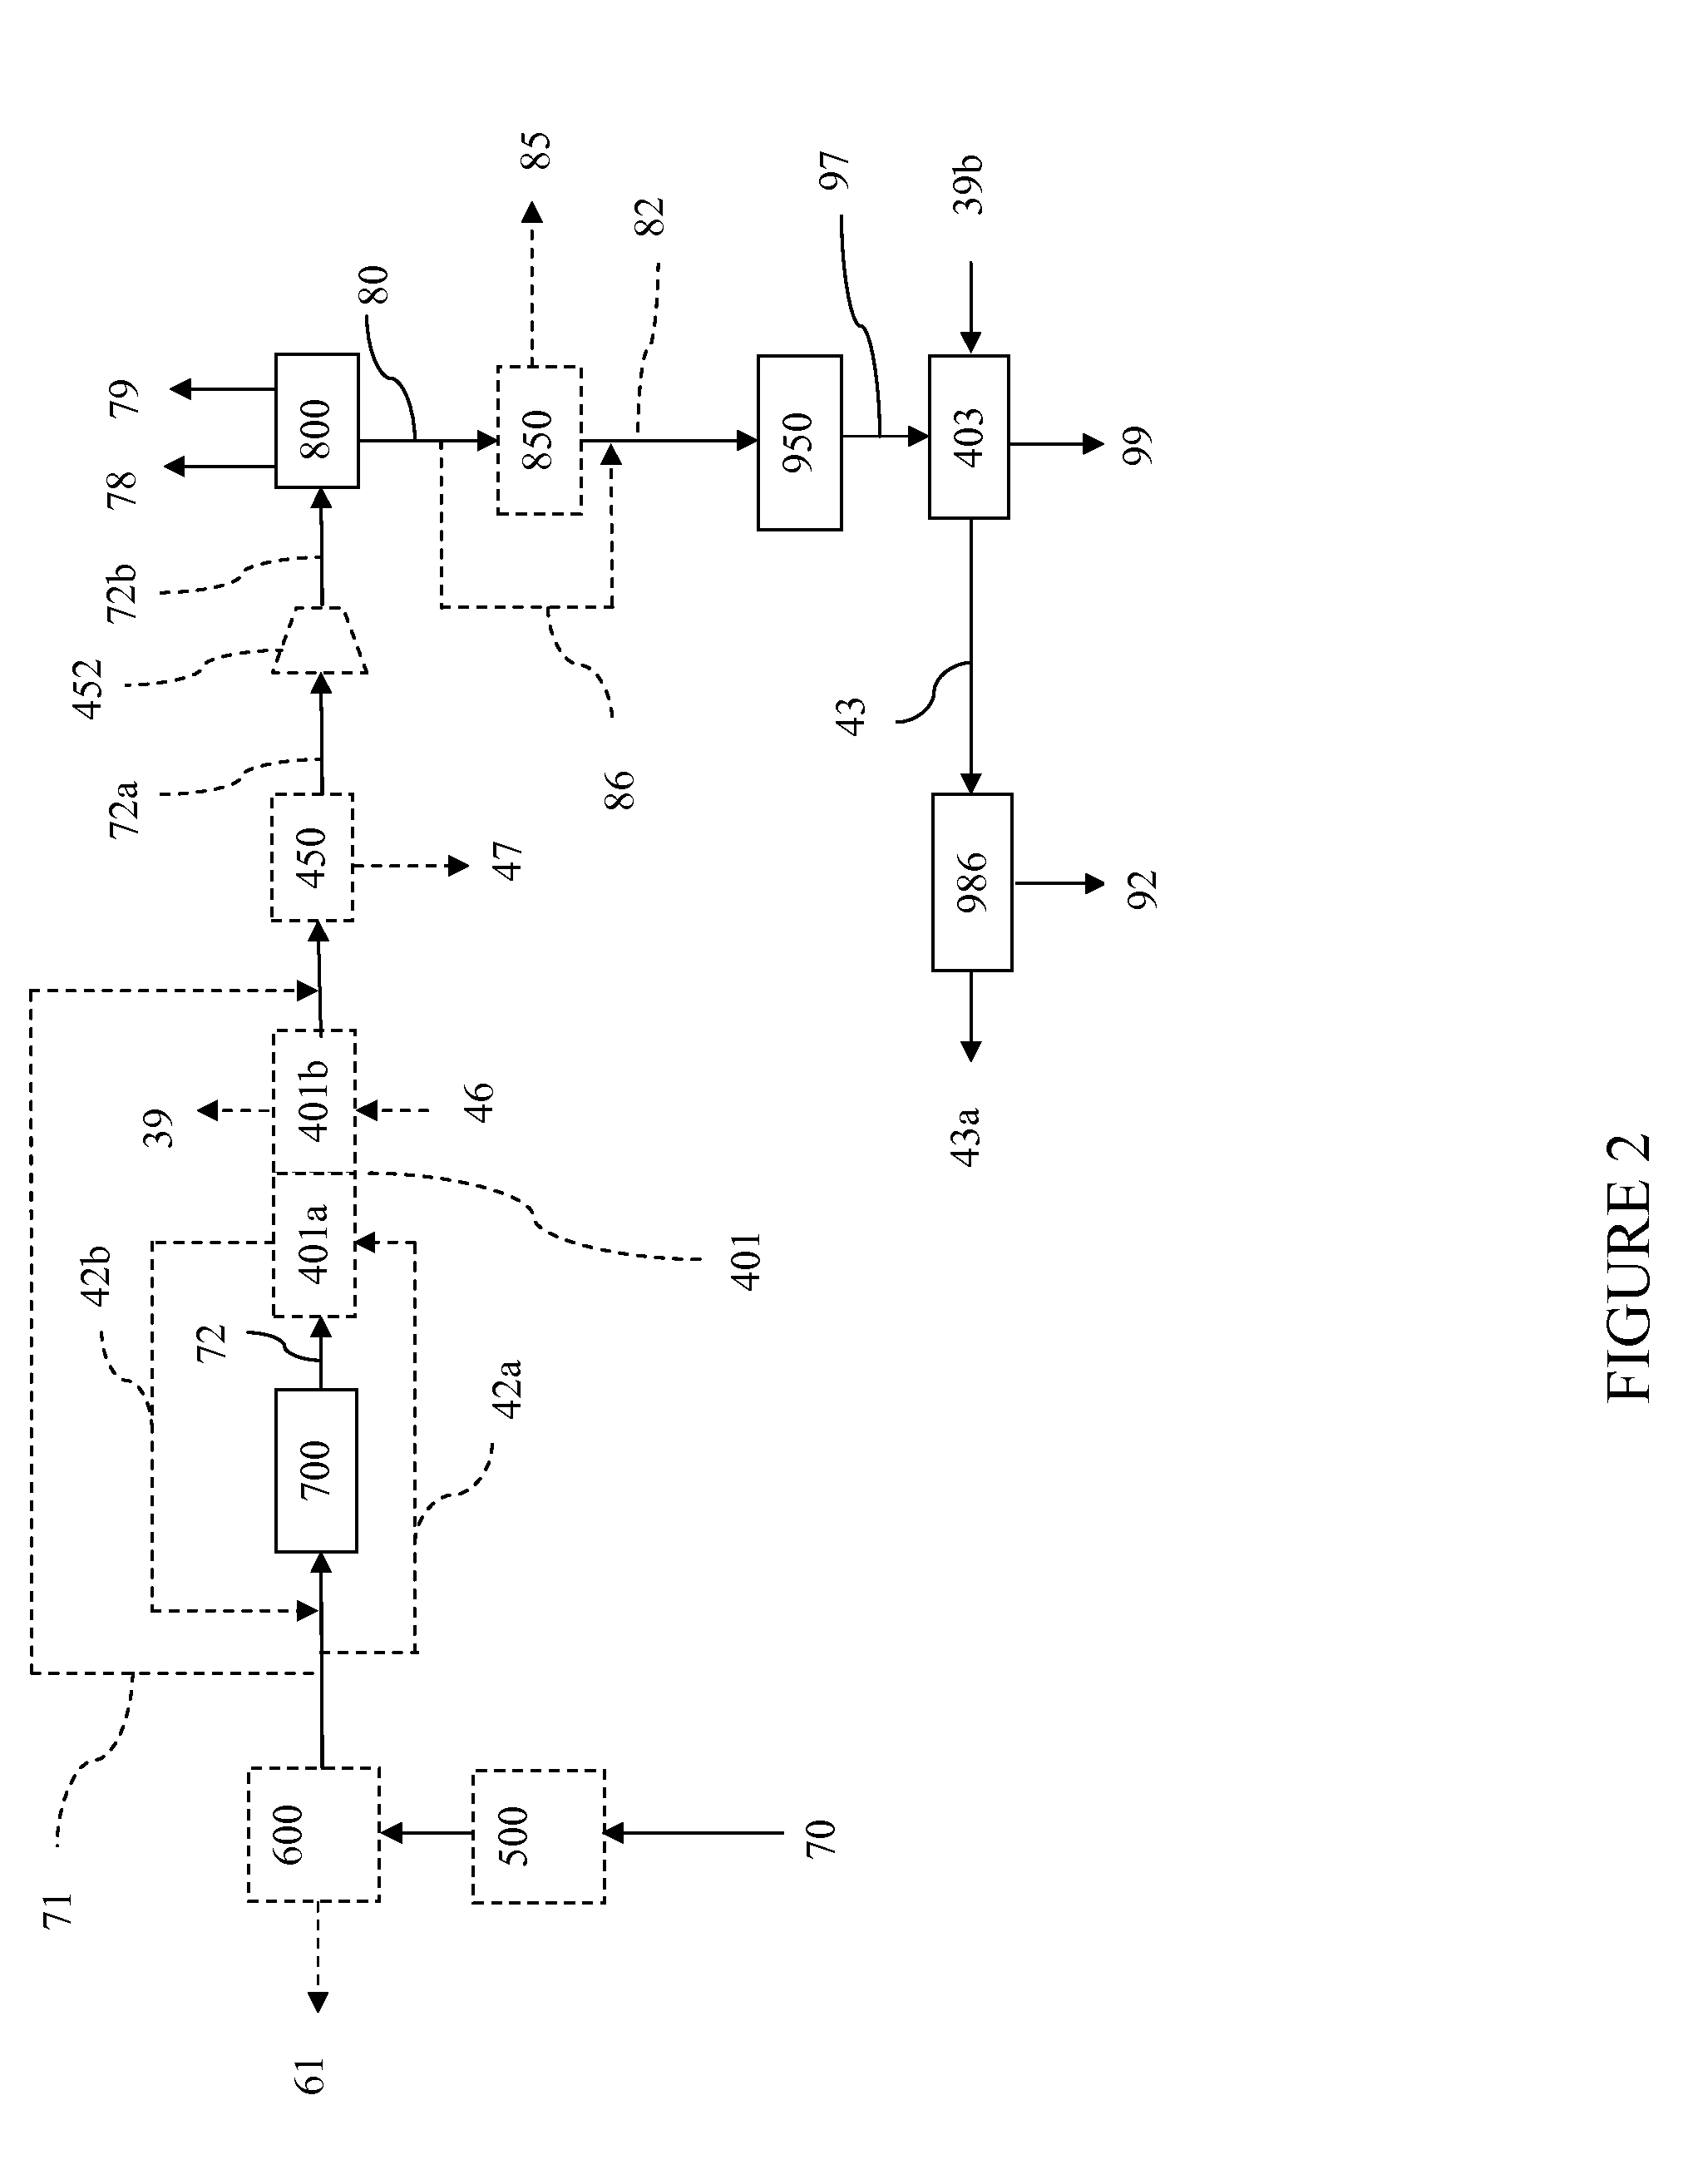 Hydromethanation of a carbonaceous feedstock